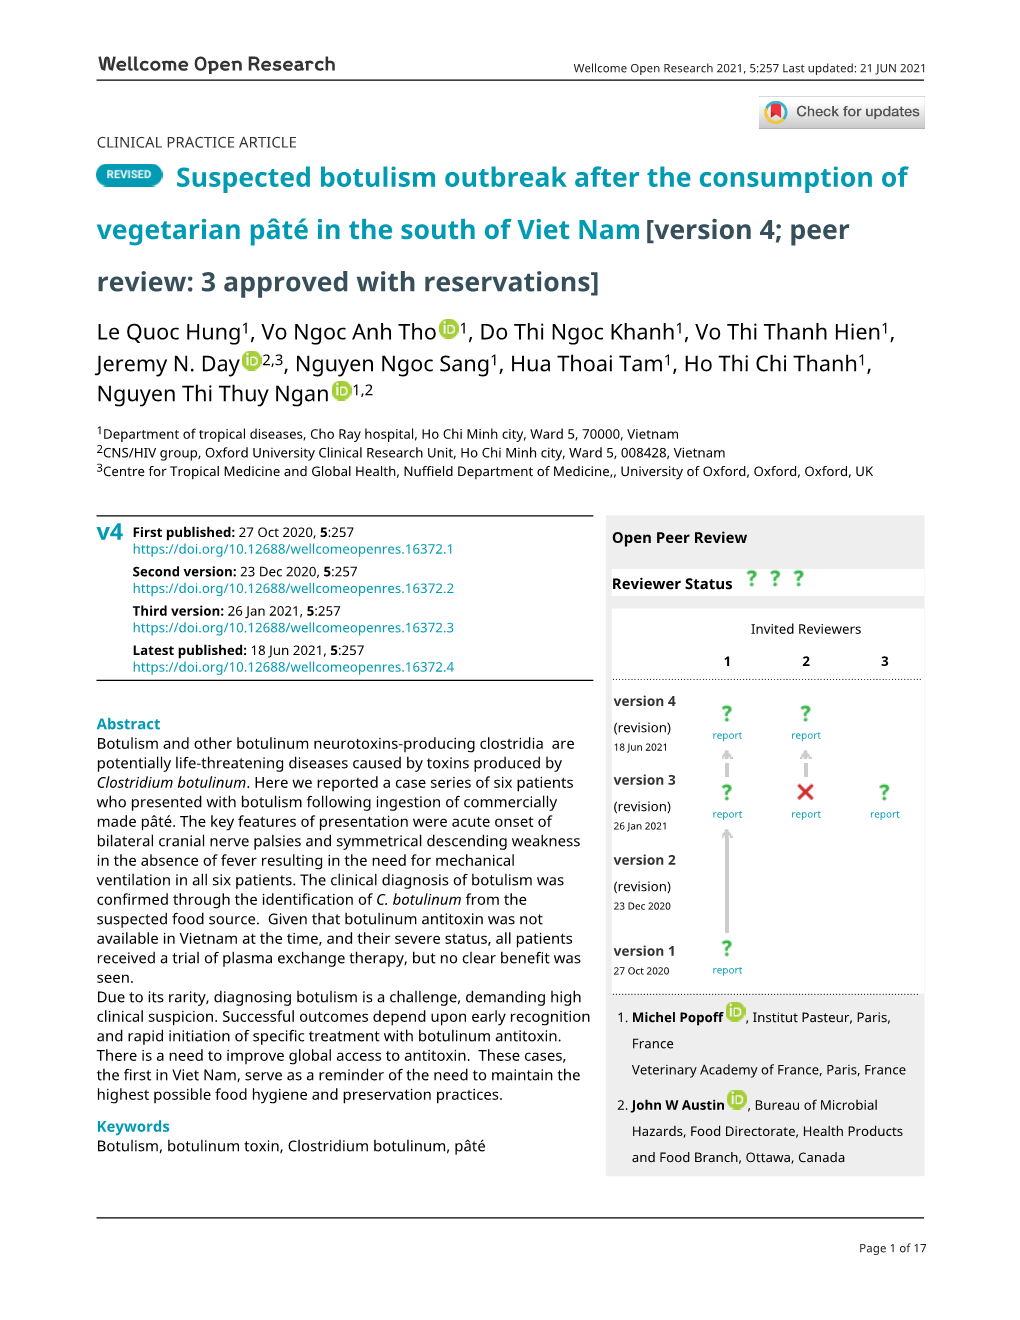 Suspected Botulism Outbreak After the Consumption of Vegetarian Pâté in the South of Viet Nam [Version 4; Peer Review: 3 Approved with Reservations]